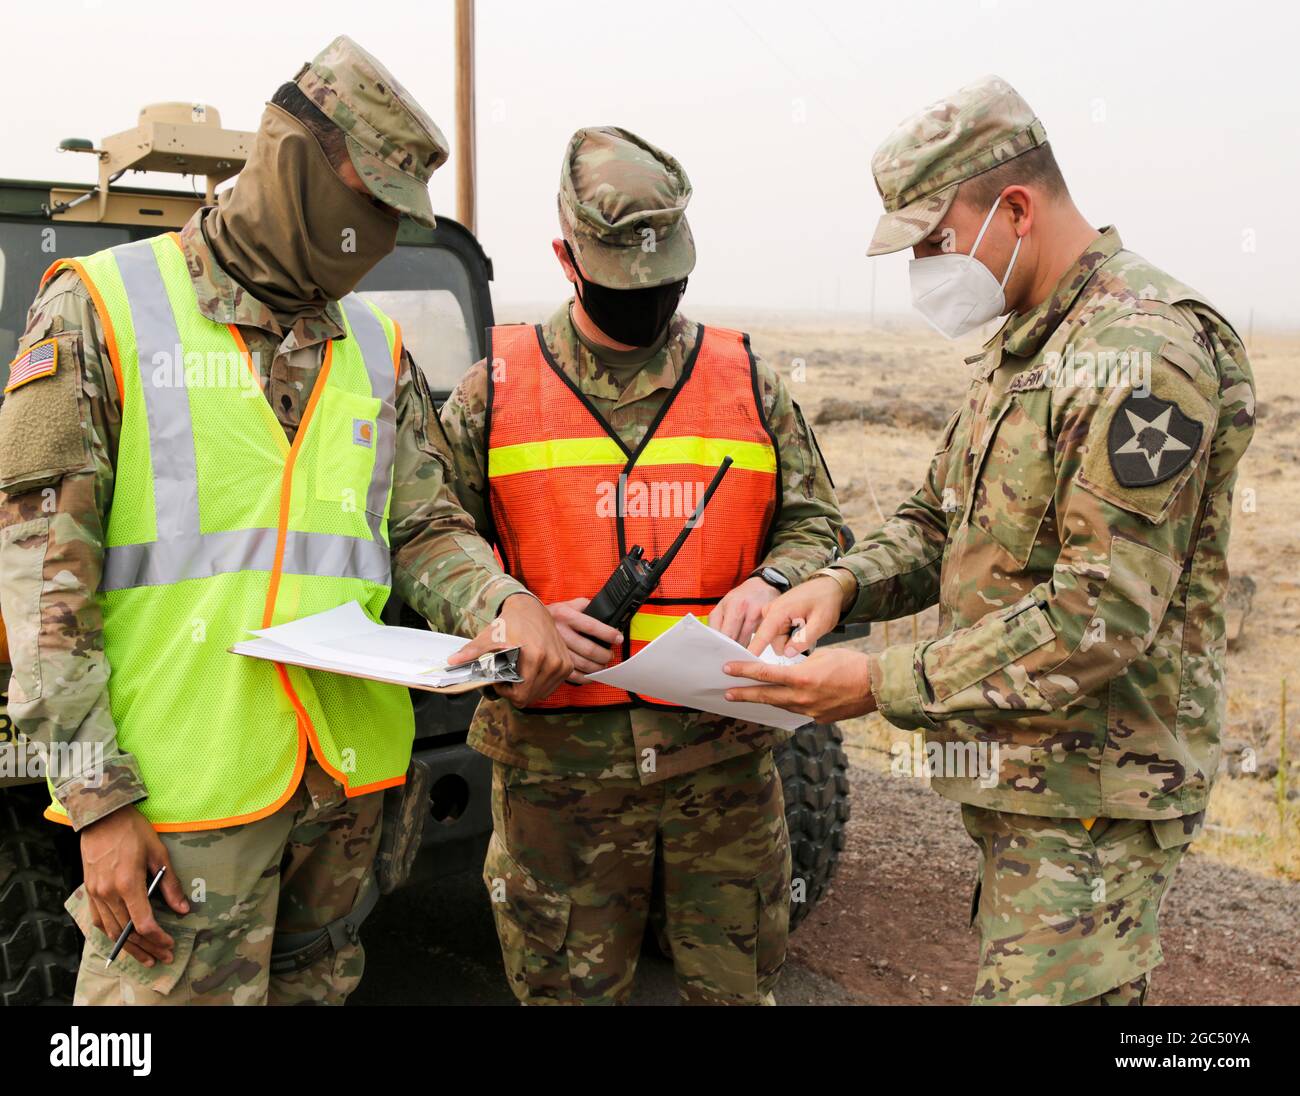 Oregon Army National Guard Spc. Russell Baghdadi, Staff Sgt. Randy Bowman and 2nd Lt. Sky Smith, all with 1st squadron, 82nd Cavalry Regiment, work together to review resident rosters at a traffic control point (TCP), Warm Springs, Ore., Sept. 17, 2020. The Lionshead Fire, located 14-miles west of Warm Springs, could potentially lead to an evacuation, leaving homes vulnerable. Soldiers from 82nd Cavalry Regiment, stationed at four TCPs along U.S. Highway 26, help reassure local citizens and monitor anyone who enters and exits the neighborhoods. Stock Photo